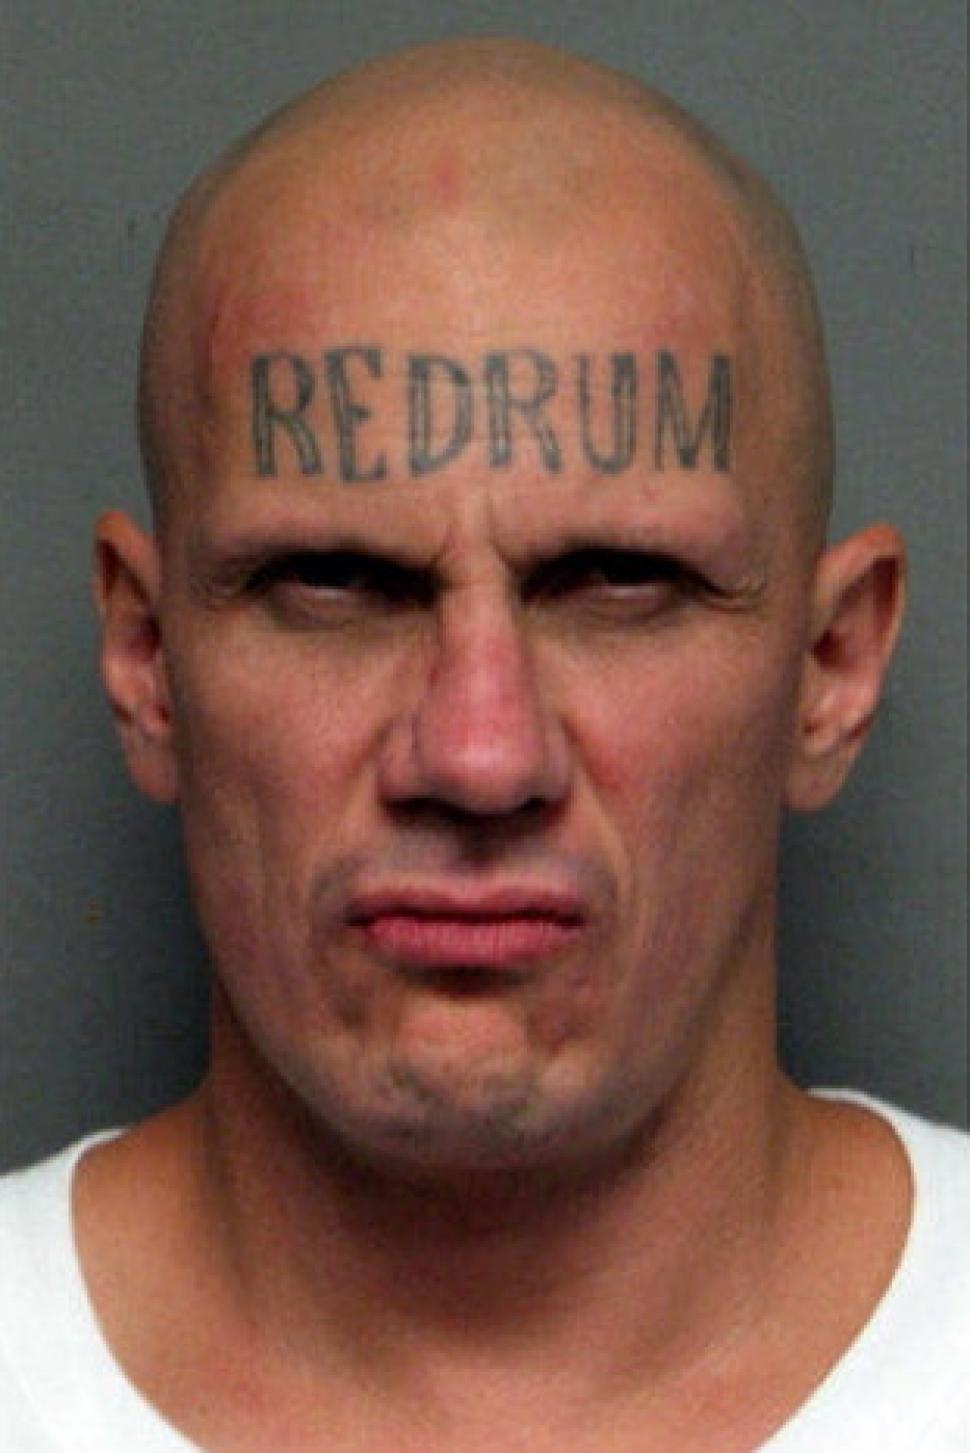 Red Drum Tattoo On Man Forehead